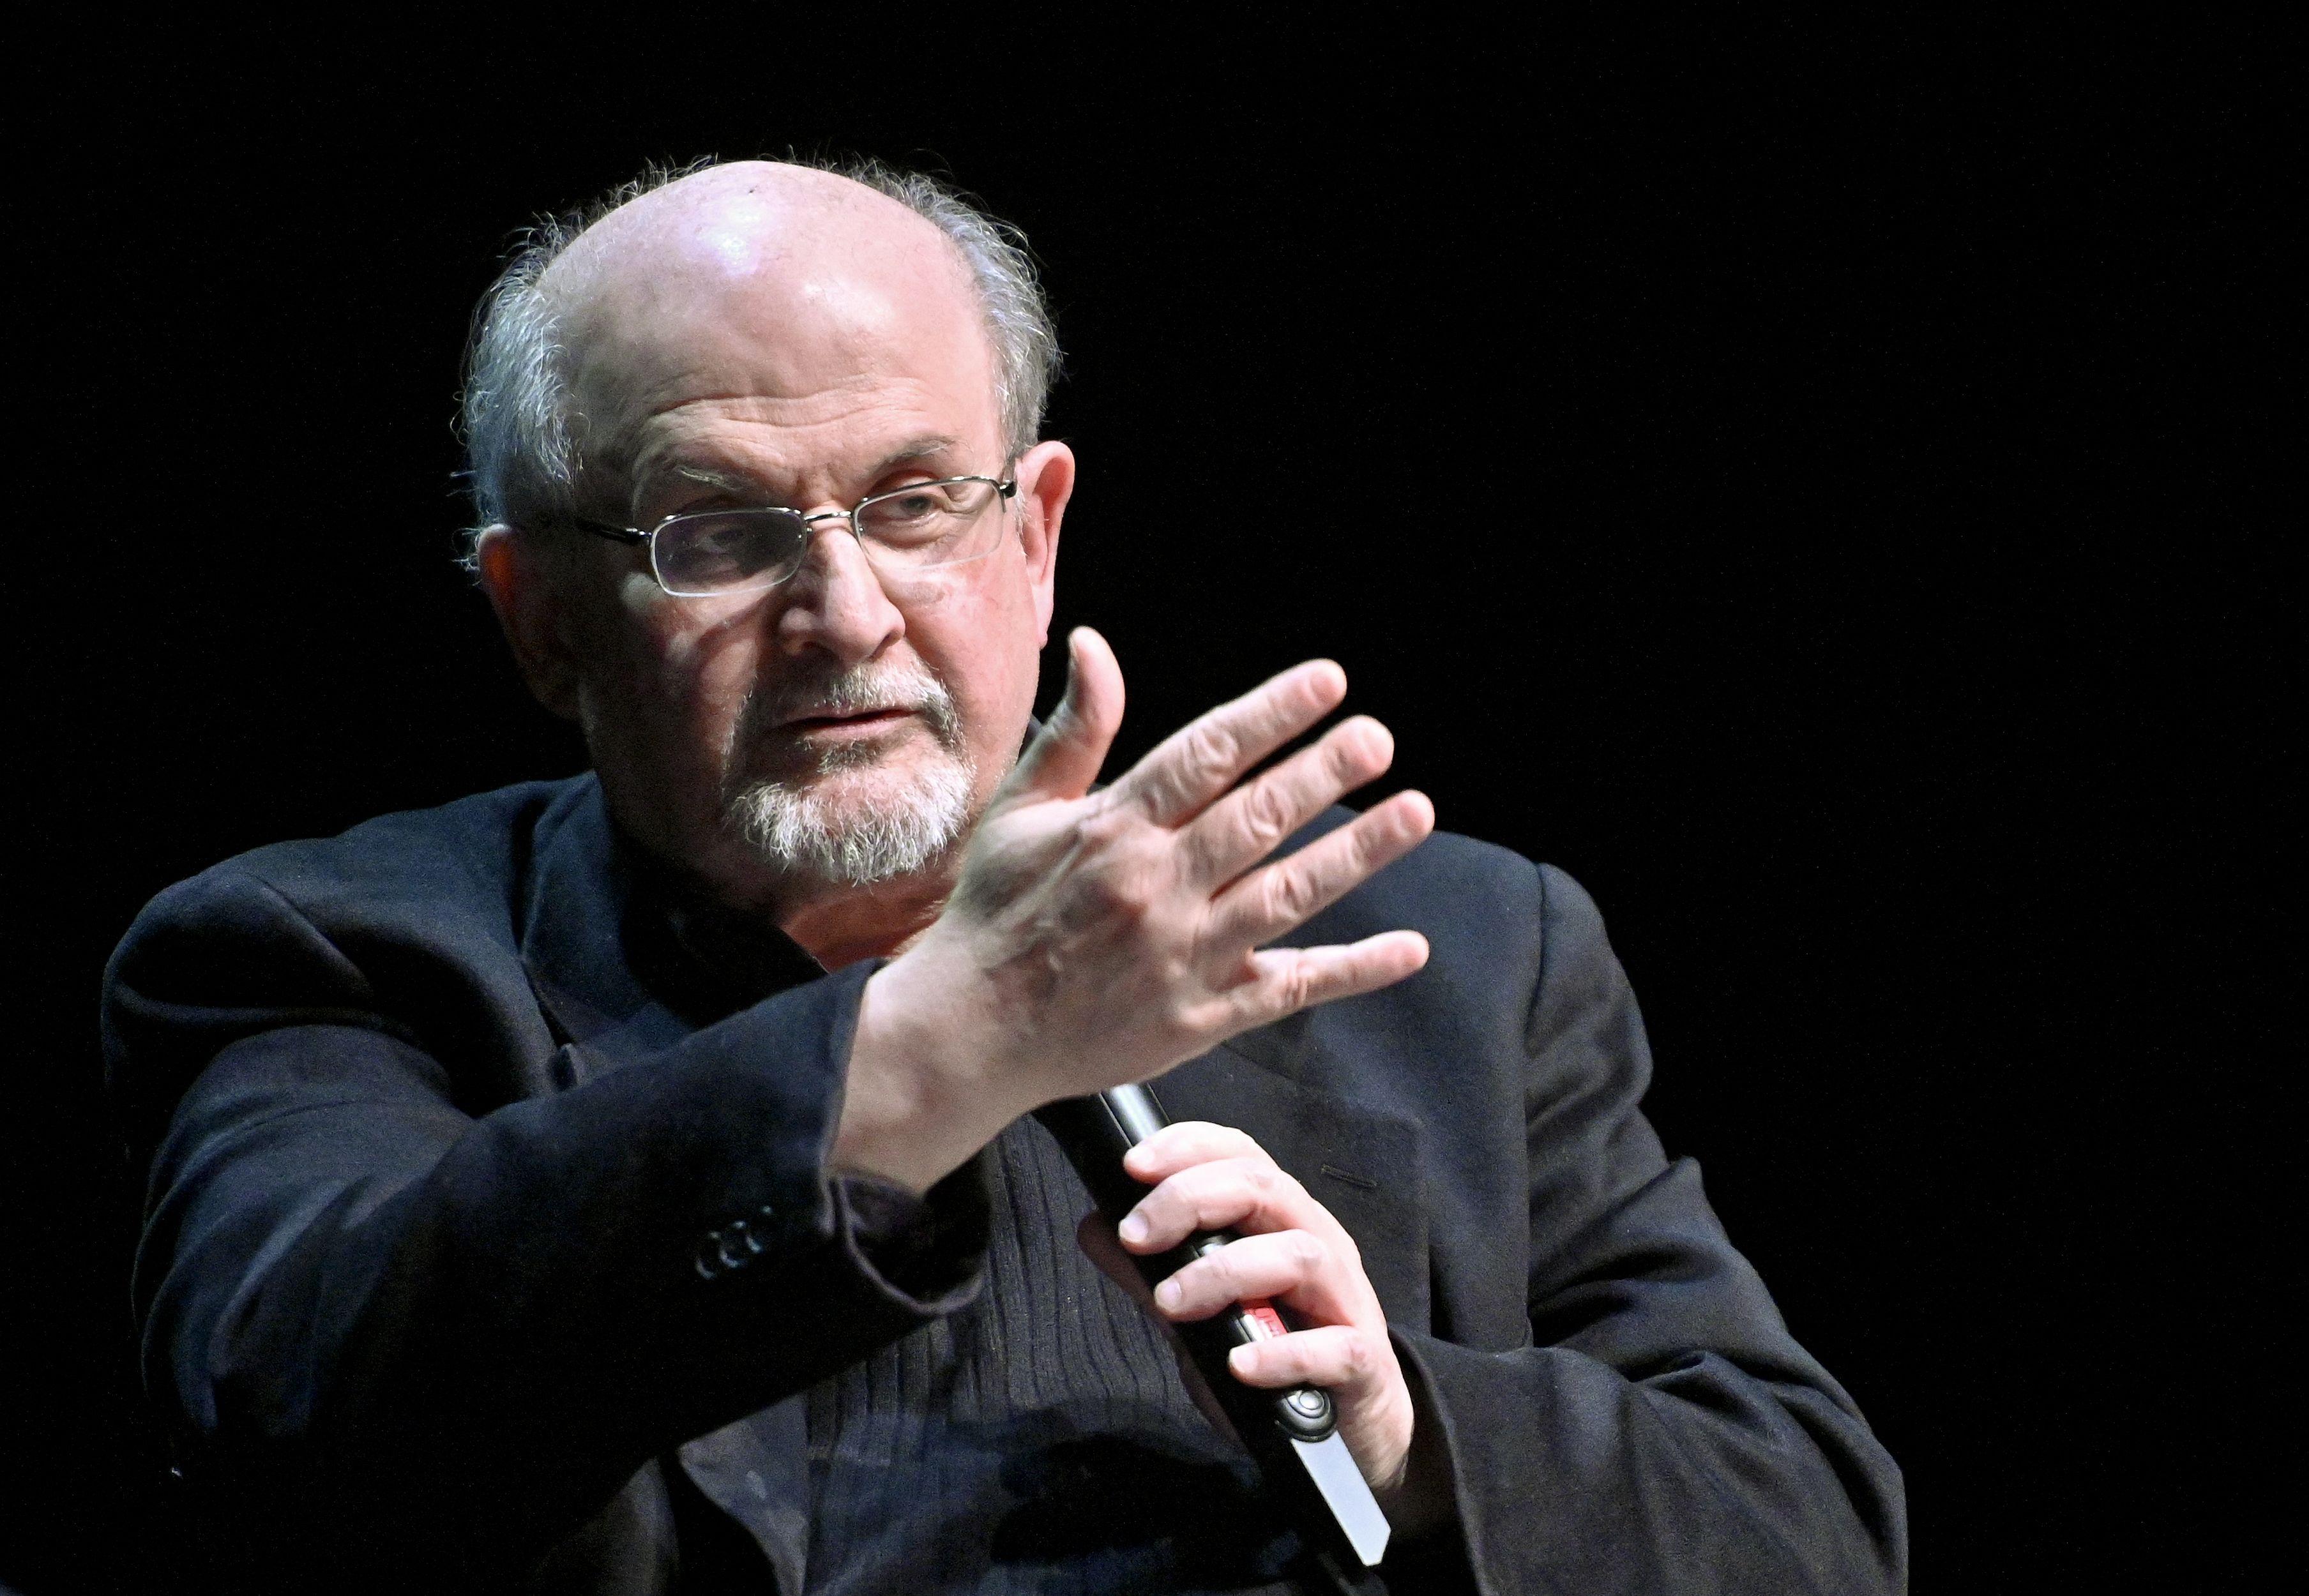 British author Salman Rushdie speaks as he presents his book "Quichotte" at the Volkstheater in Vienna, Austria, on November 16, 2019. - Austria OUT (Photo by HERBERT NEUBAUER / APA / AFP) / Austria OUT (Photo by HERBERT NEUBAUER/APA/AFP via Getty Images)